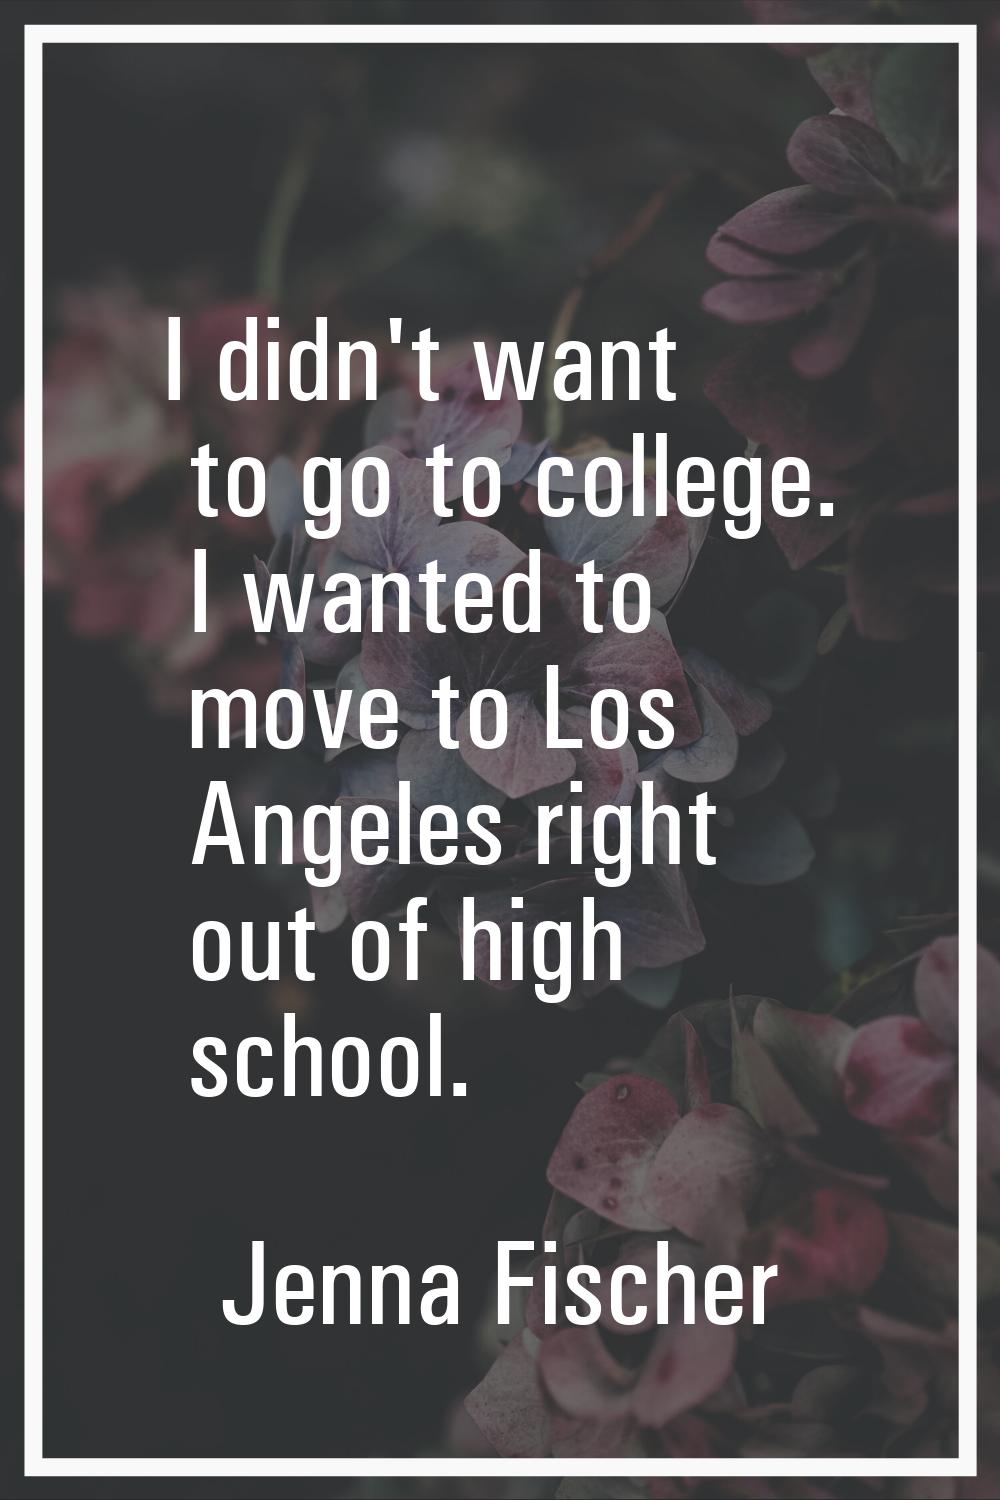 I didn't want to go to college. I wanted to move to Los Angeles right out of high school.